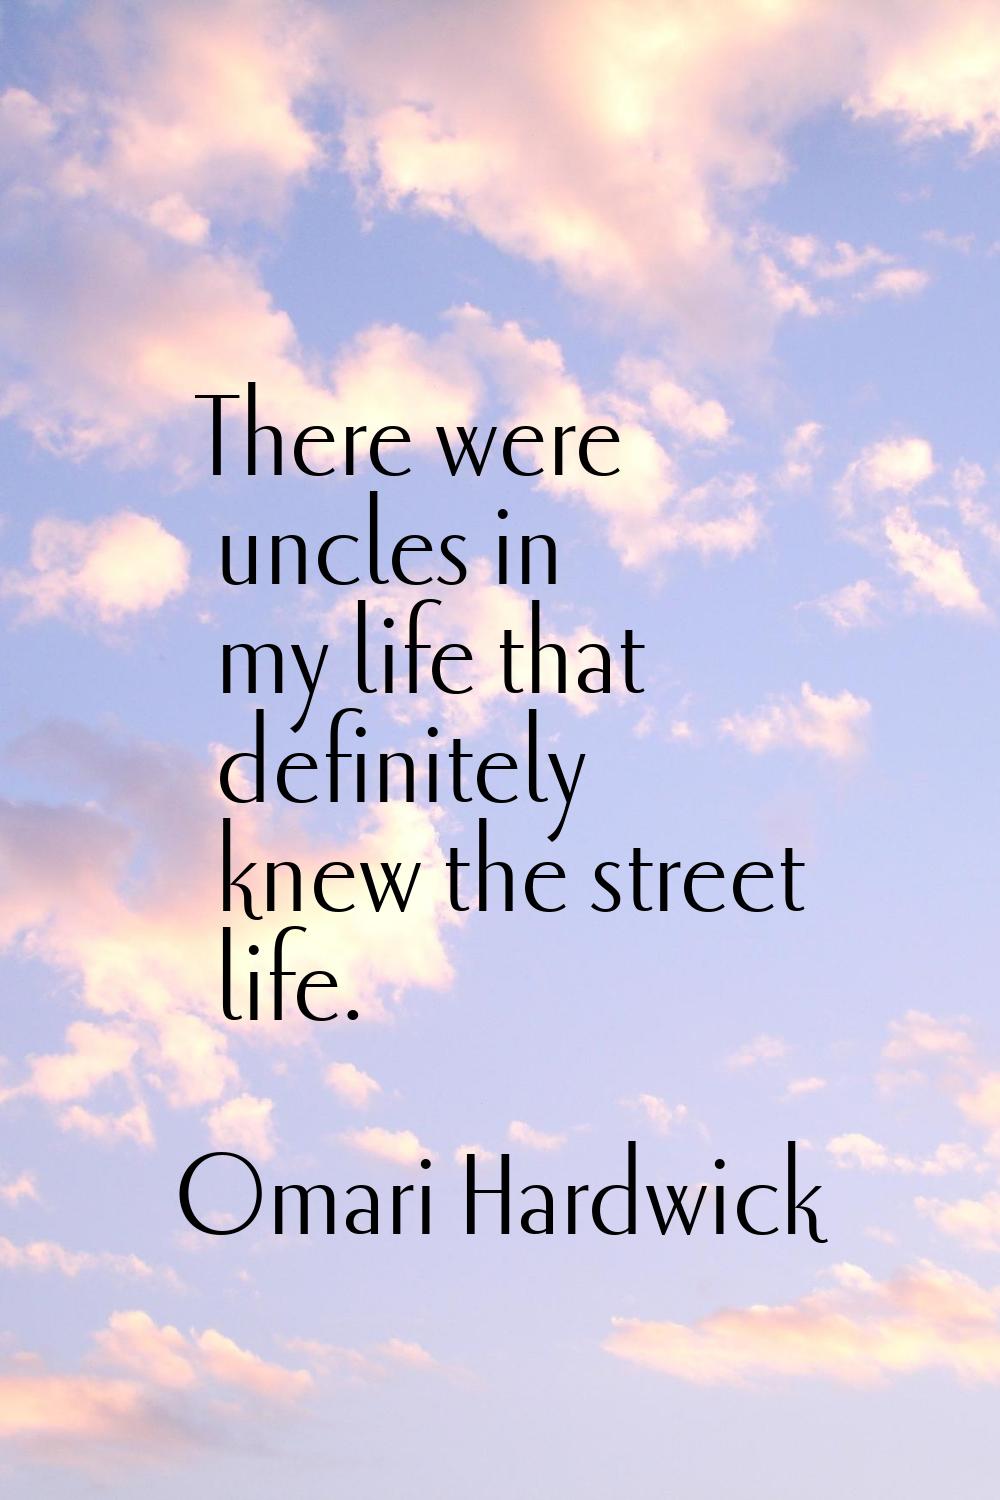 There were uncles in my life that definitely knew the street life.